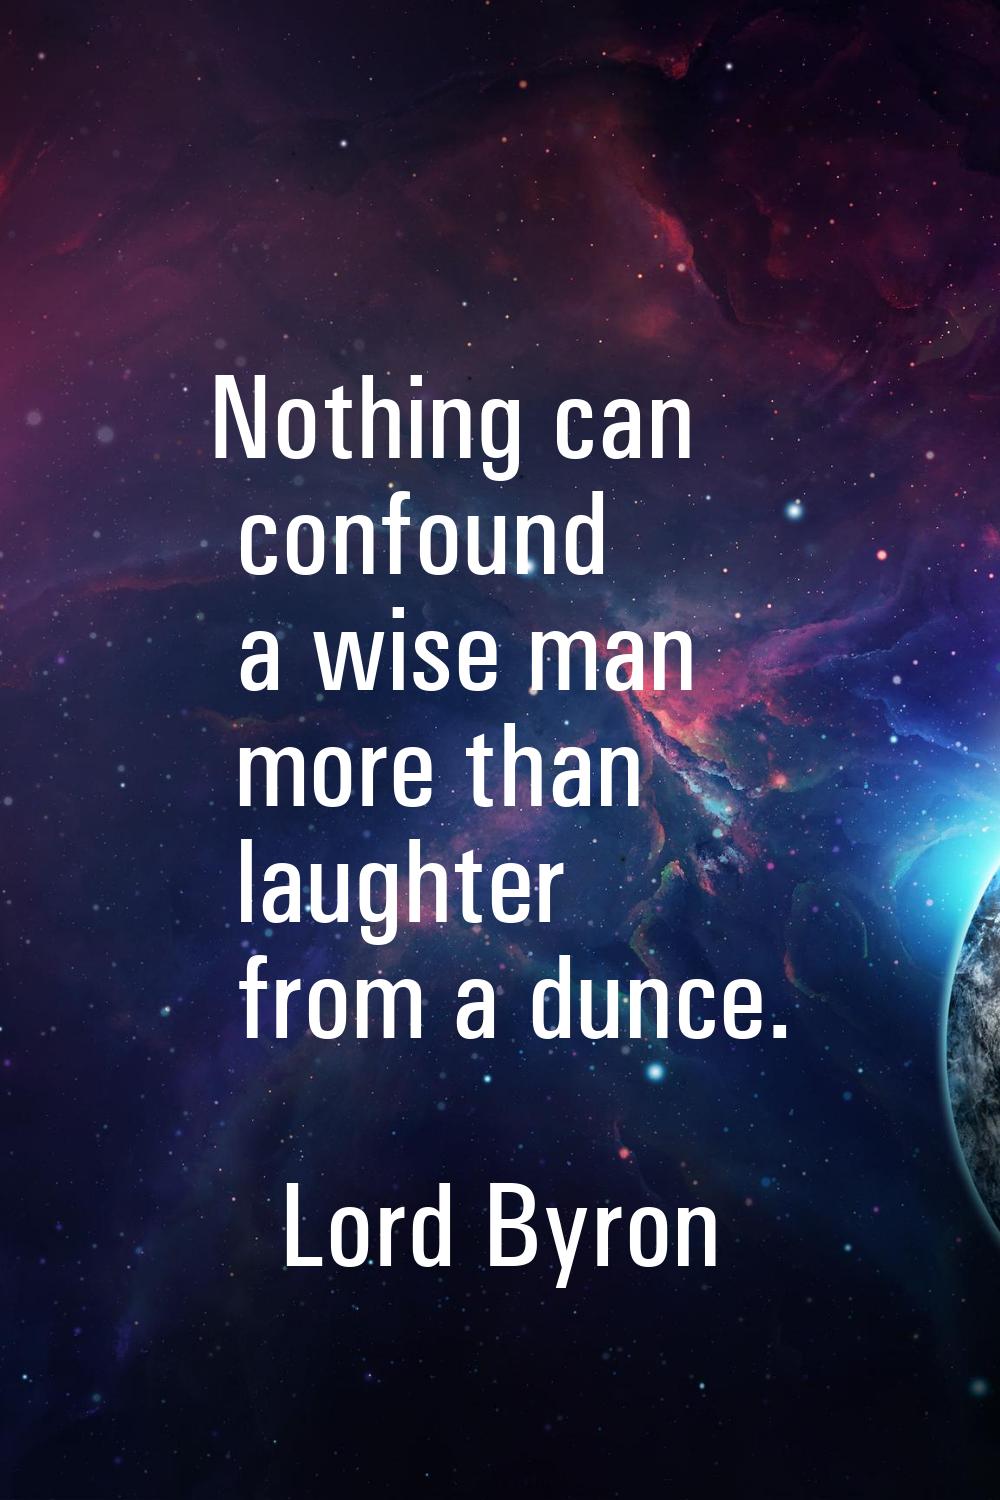 Nothing can confound a wise man more than laughter from a dunce.